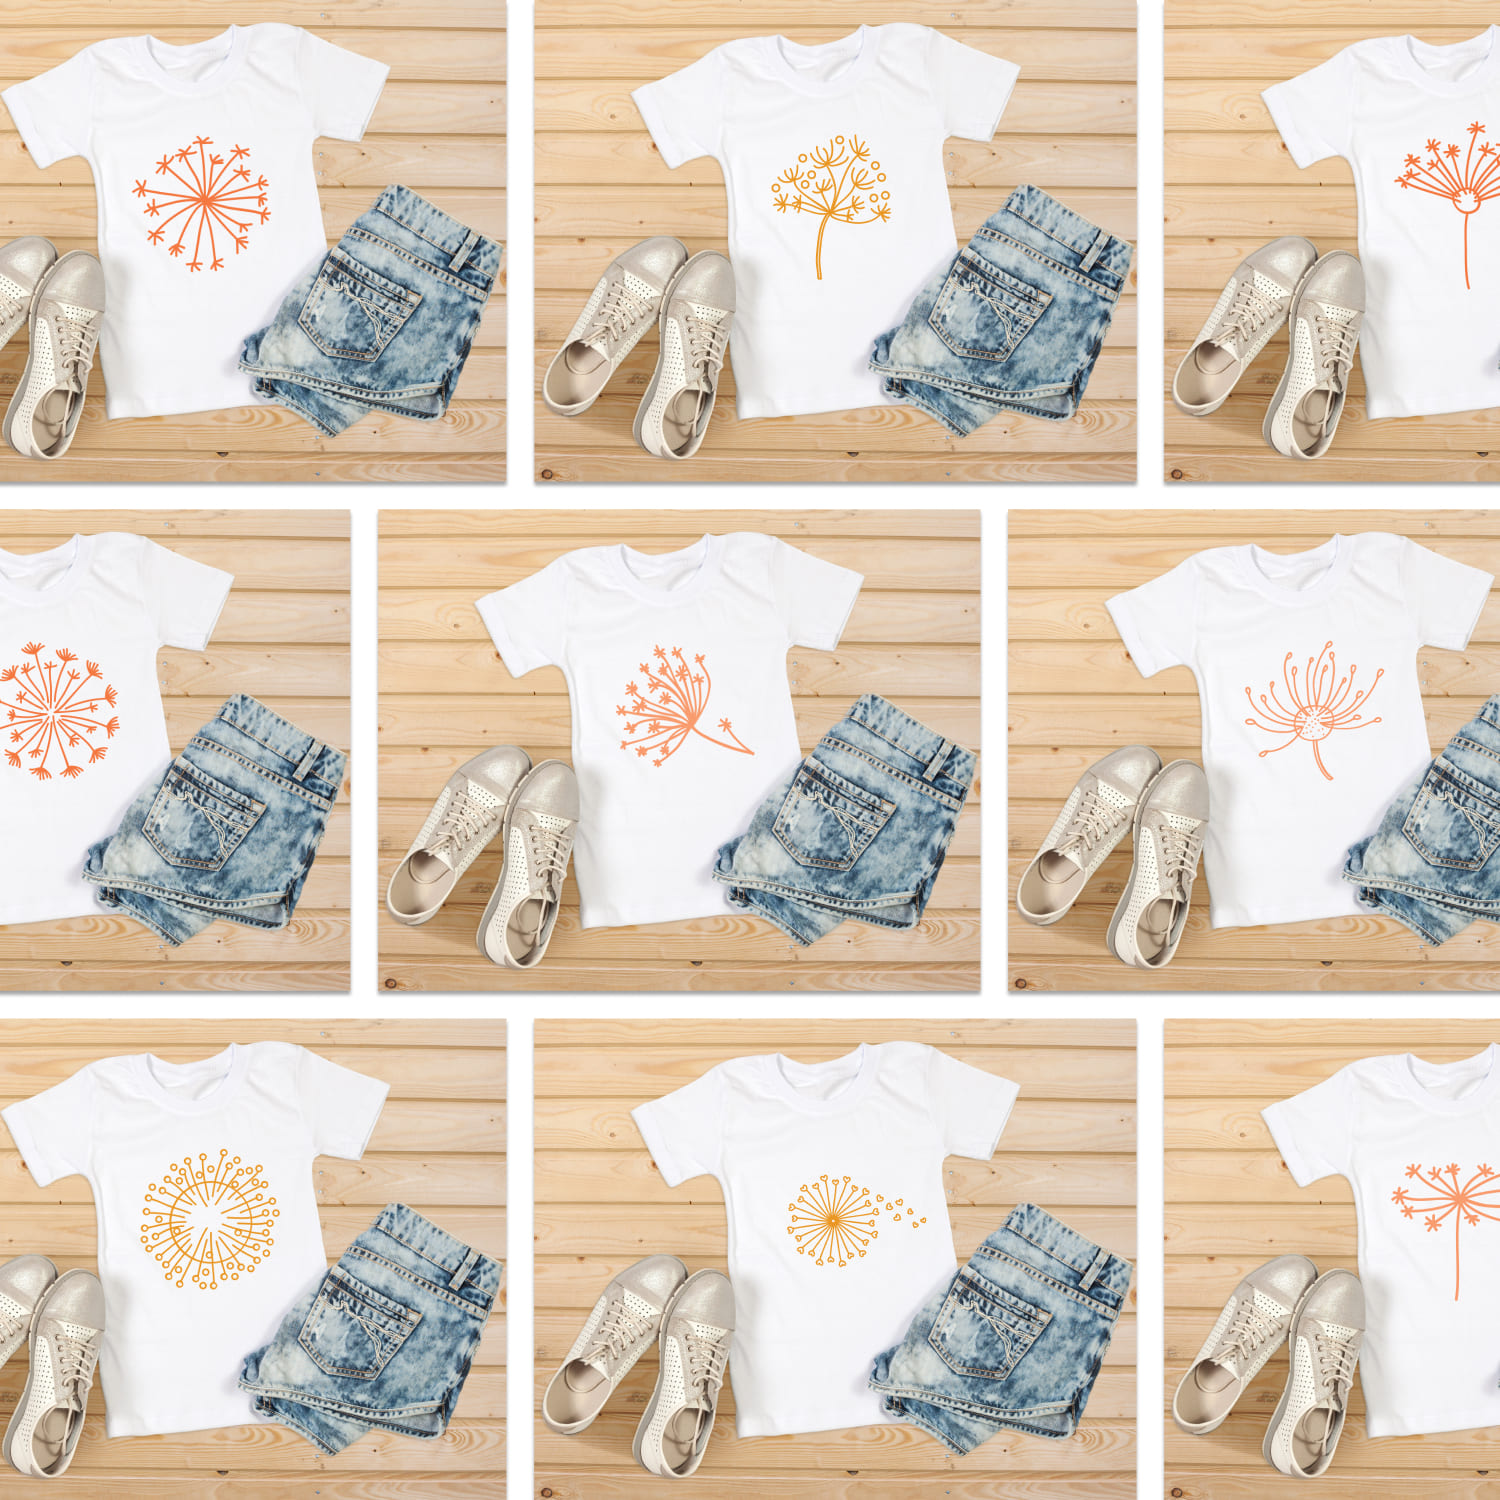 Bundle of images of t-shirts with adorable dandelion prints.